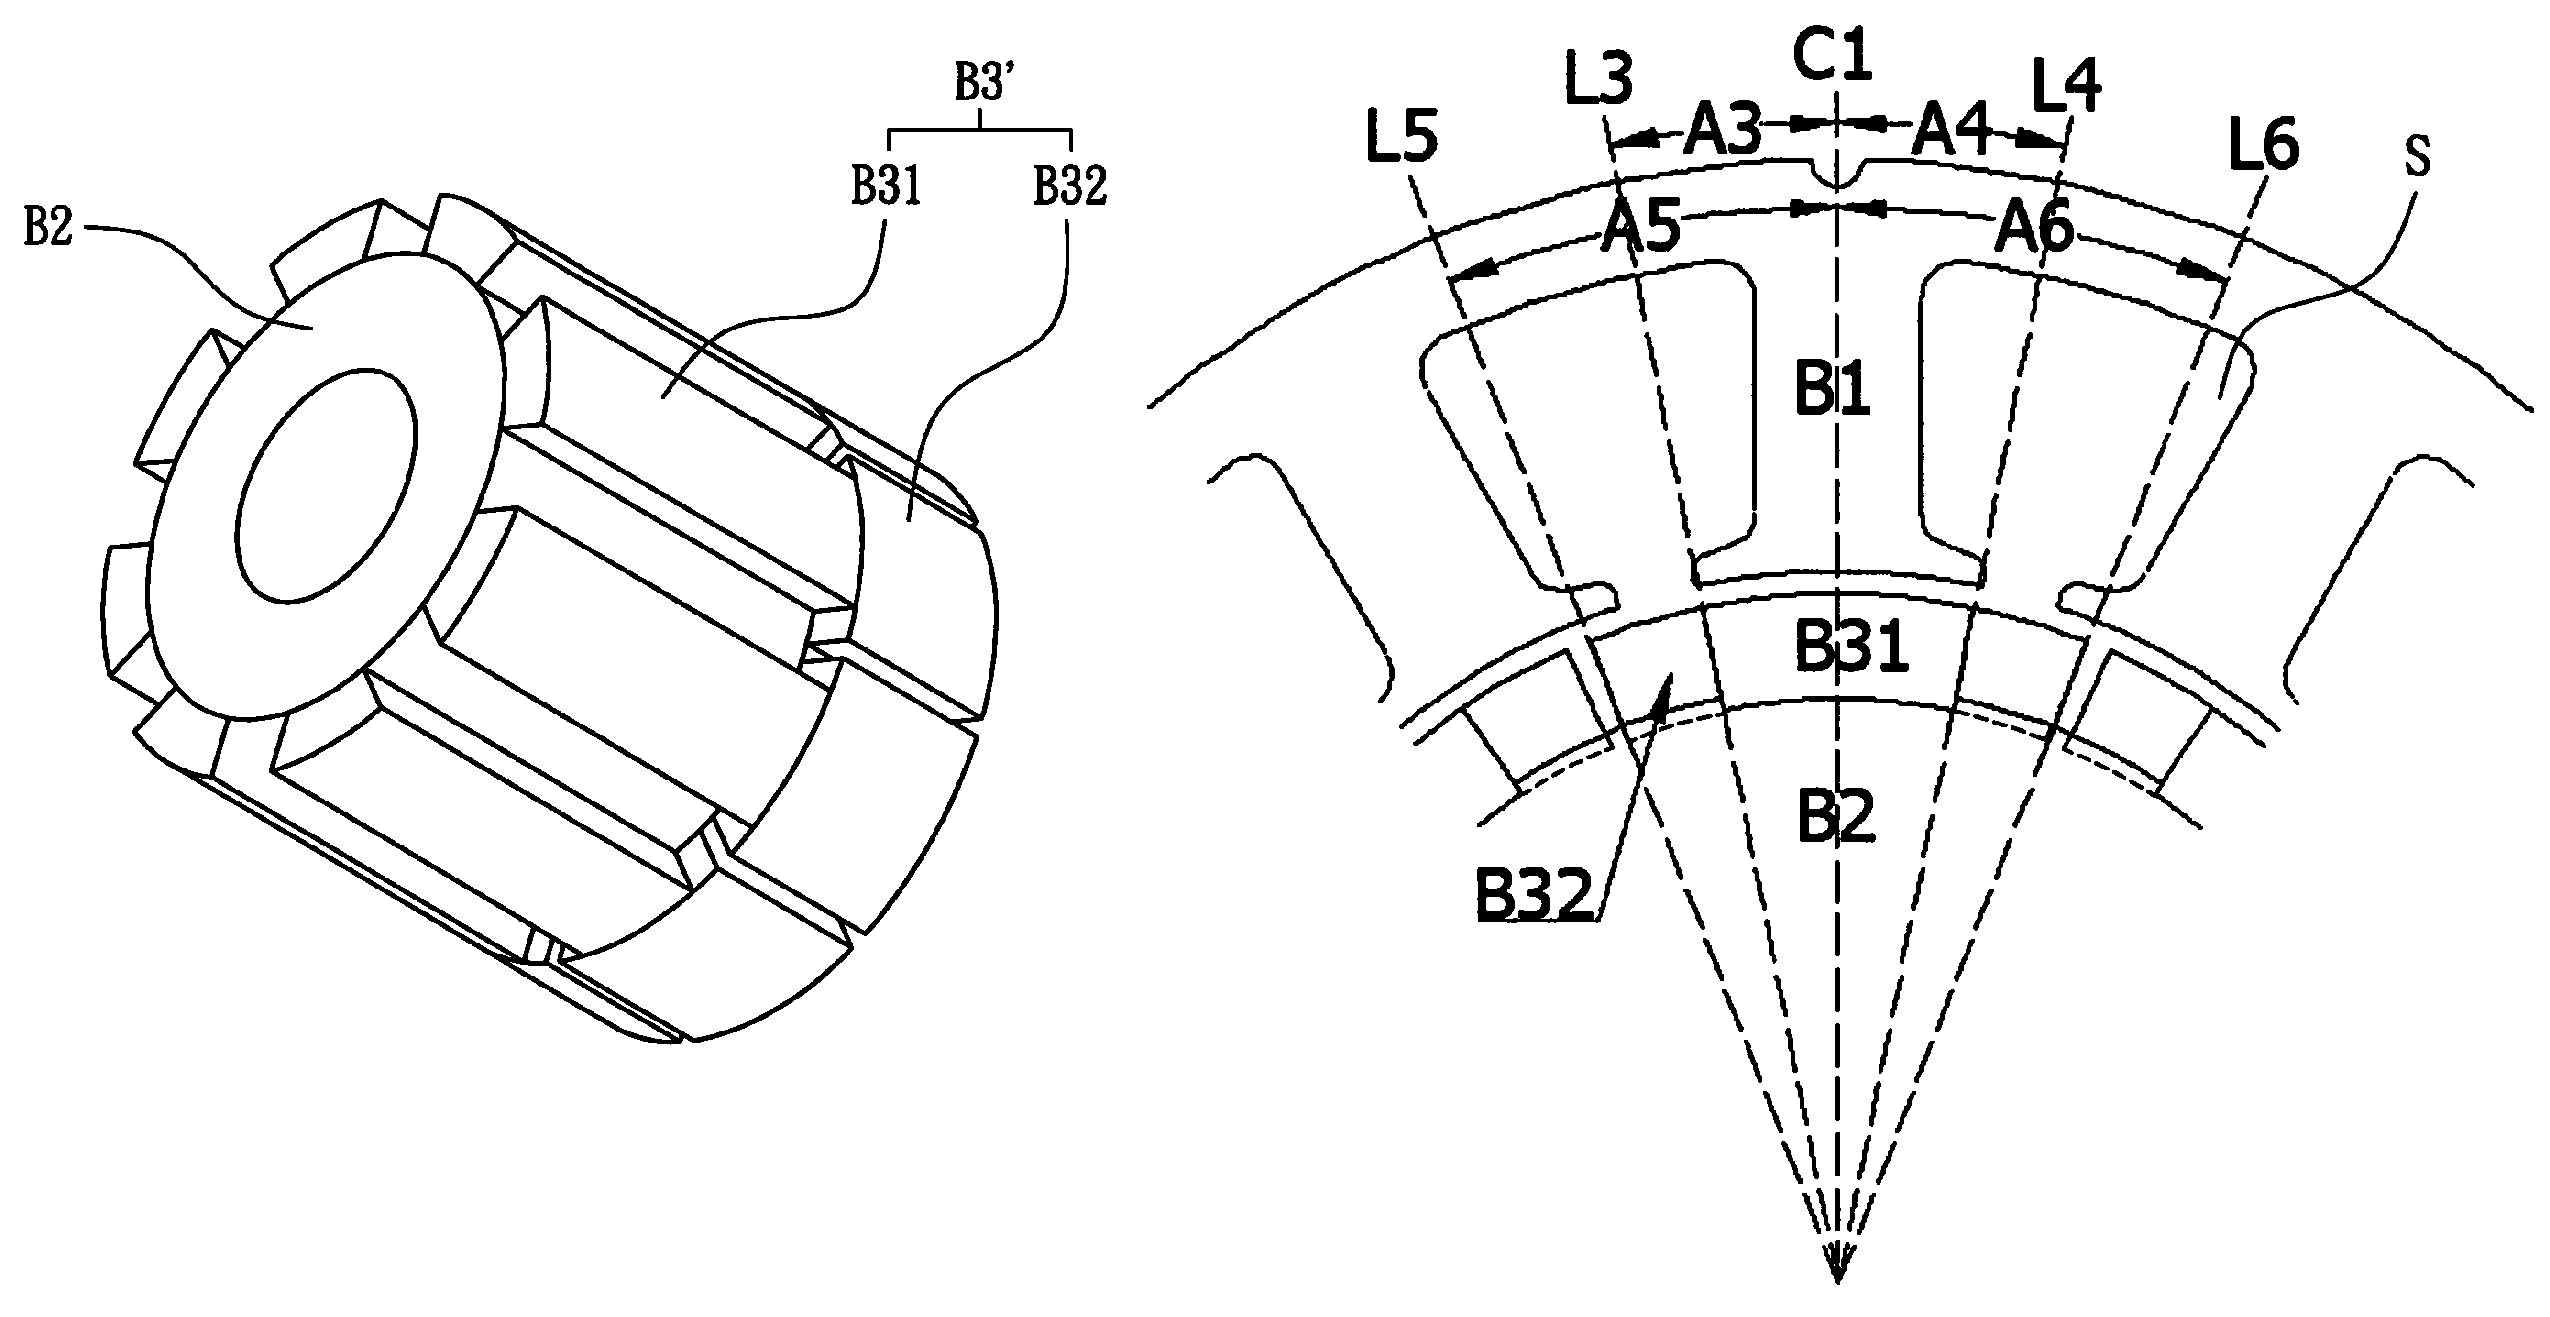 Complementary permanent magnet structure capable of minimizing cogging torque for rotating electric machine